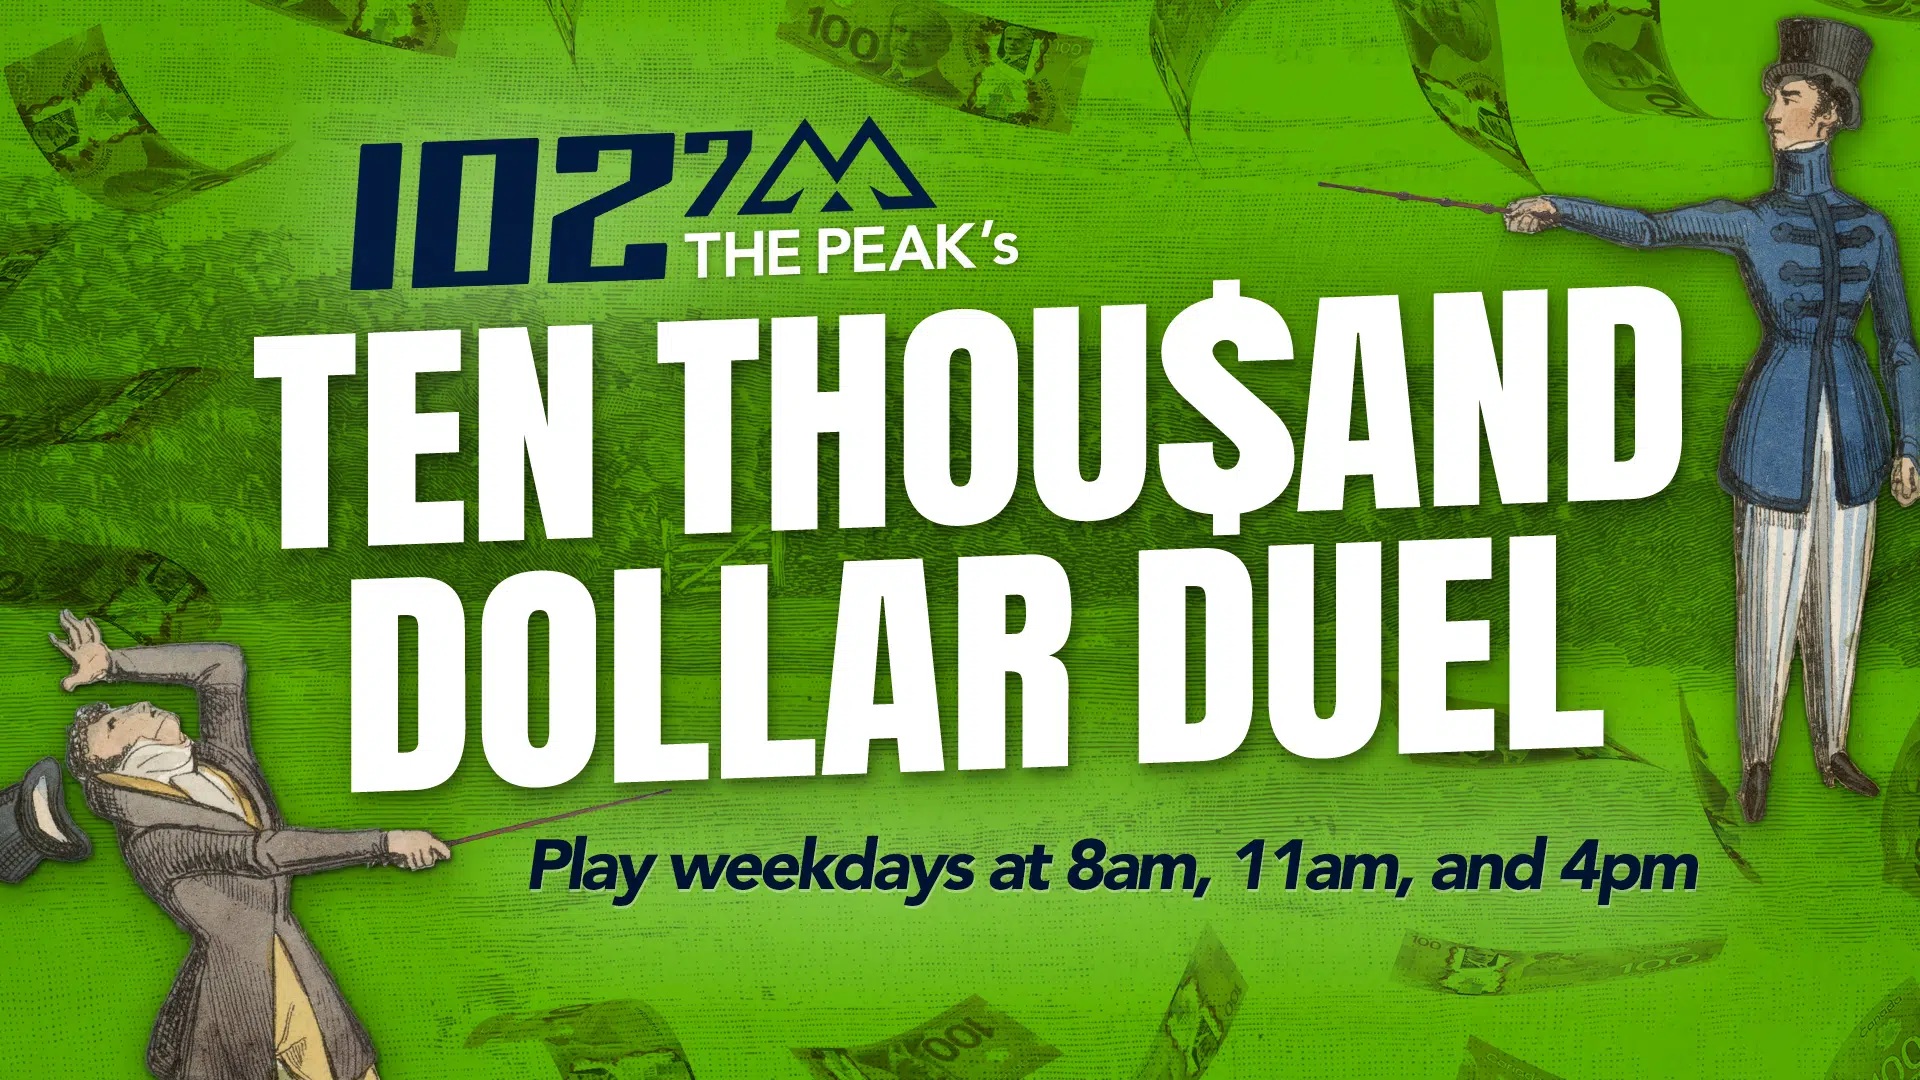 THE PEAK’s Ten Thou$and Dollar Duel